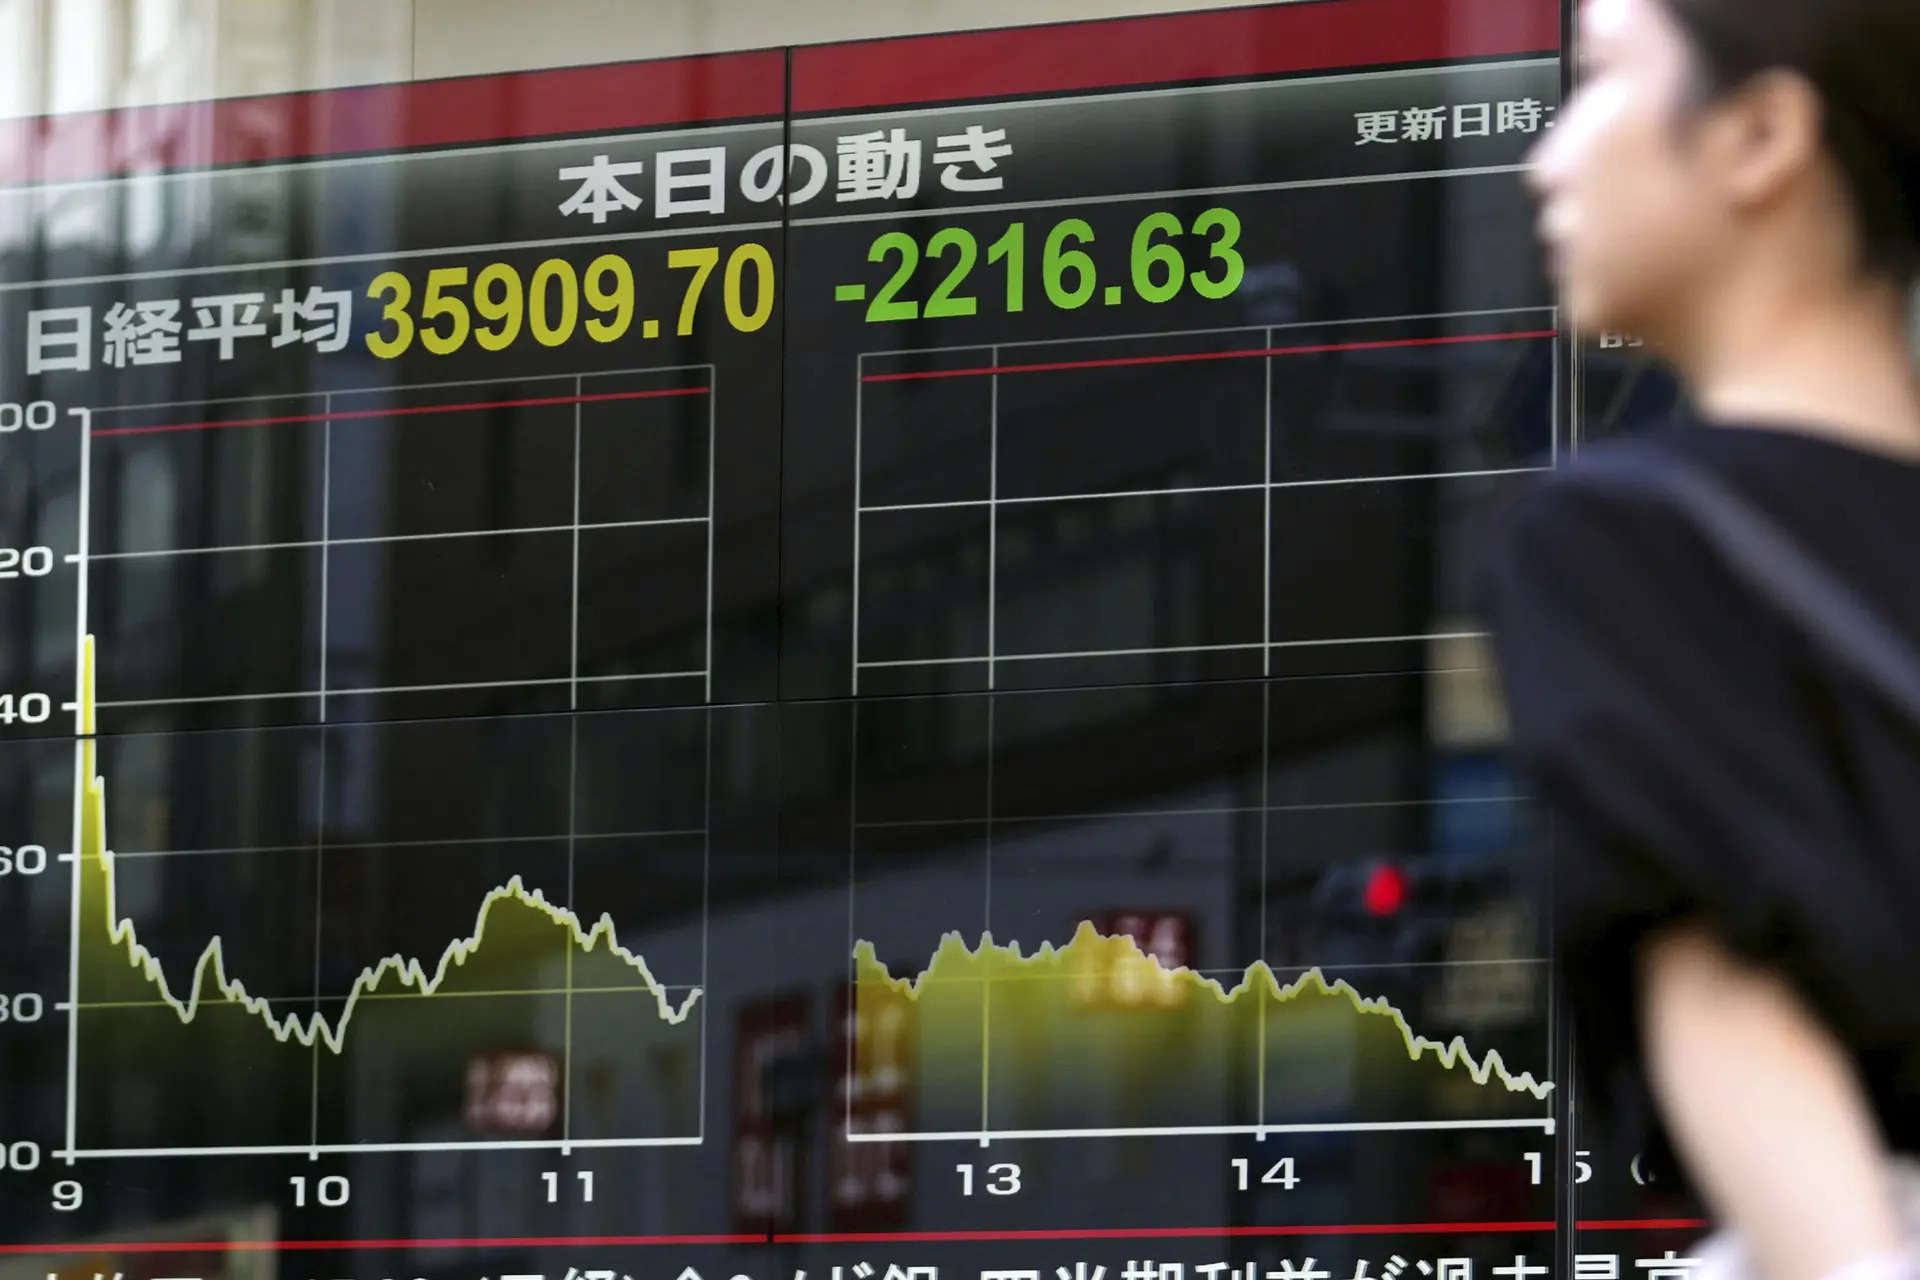 Japan's Nikkei 225 index plunges nearly 7% as global sell-offs resume 